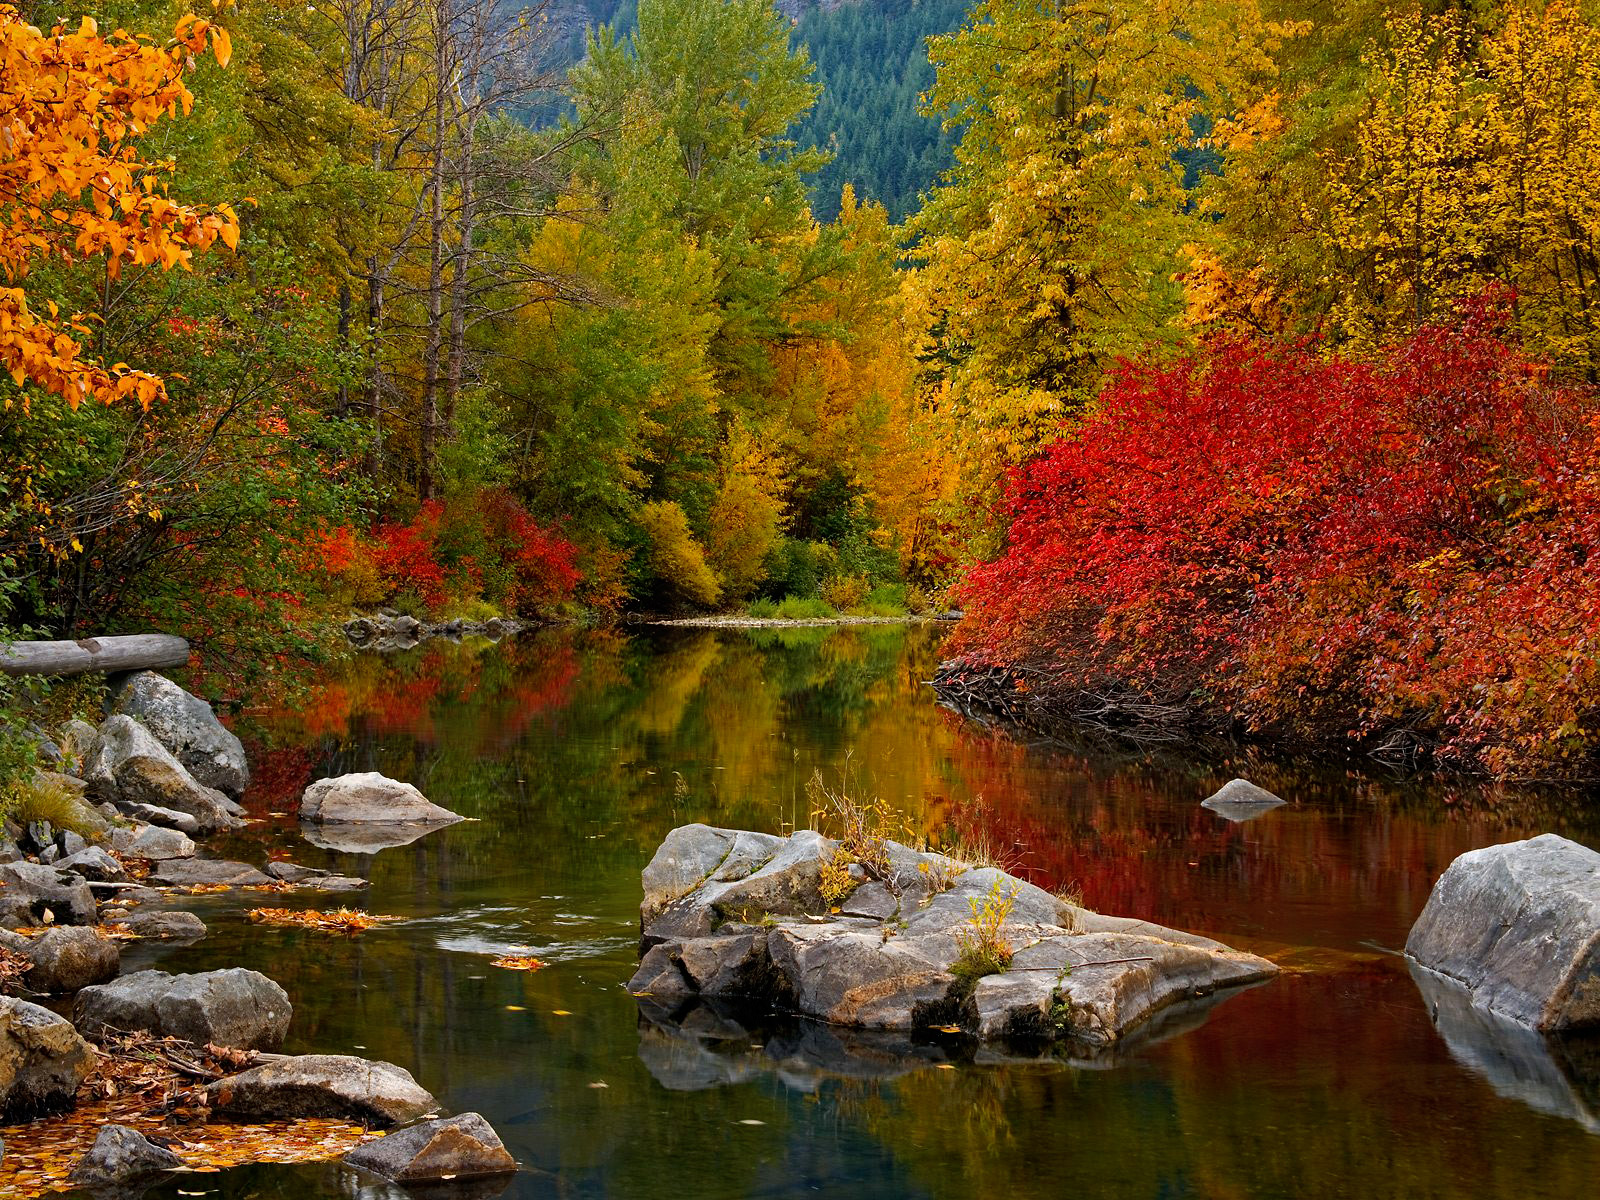  bio bing autumn wallpapers this bing wallpaper images autumn and